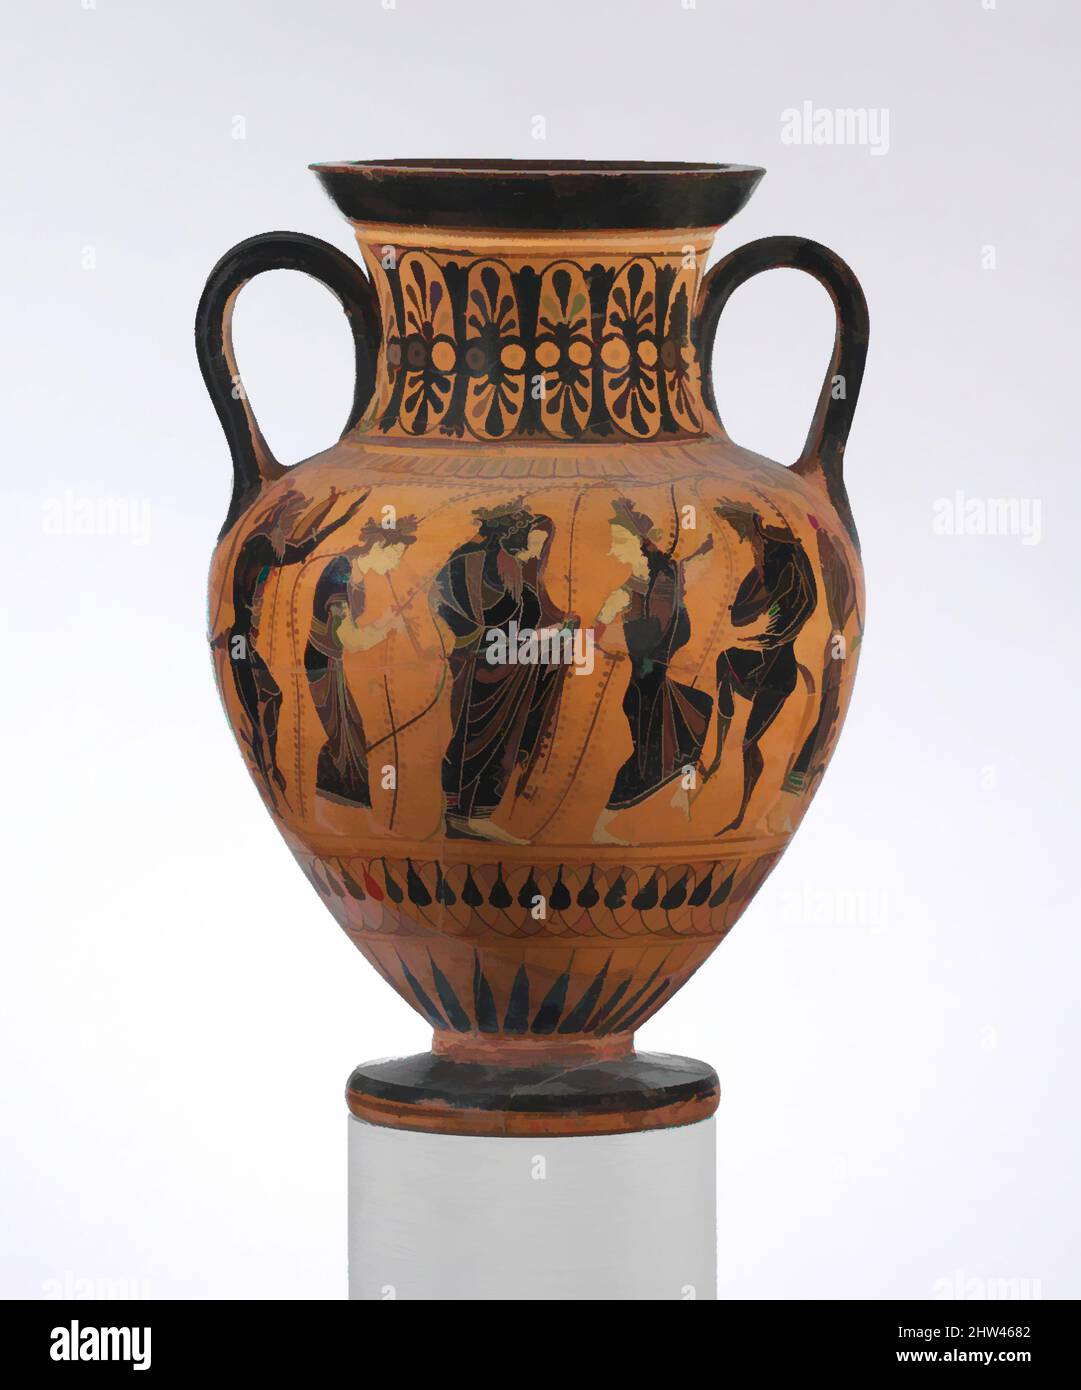 Art inspired by Terracotta neck-amphora (jar), Archaic, last quarter of 6th century B.C., Greek, Attic, Terracotta; black-figure, H.: 11 5/16 in. (28.7 cm), Vases, Obverse, Dionysos and Ariadne with satyrs and maenads Reverse, Departure of warriors with chariot, Classic works modernized by Artotop with a splash of modernity. Shapes, color and value, eye-catching visual impact on art. Emotions through freedom of artworks in a contemporary way. A timeless message pursuing a wildly creative new direction. Artists turning to the digital medium and creating the Artotop NFT Stock Photo